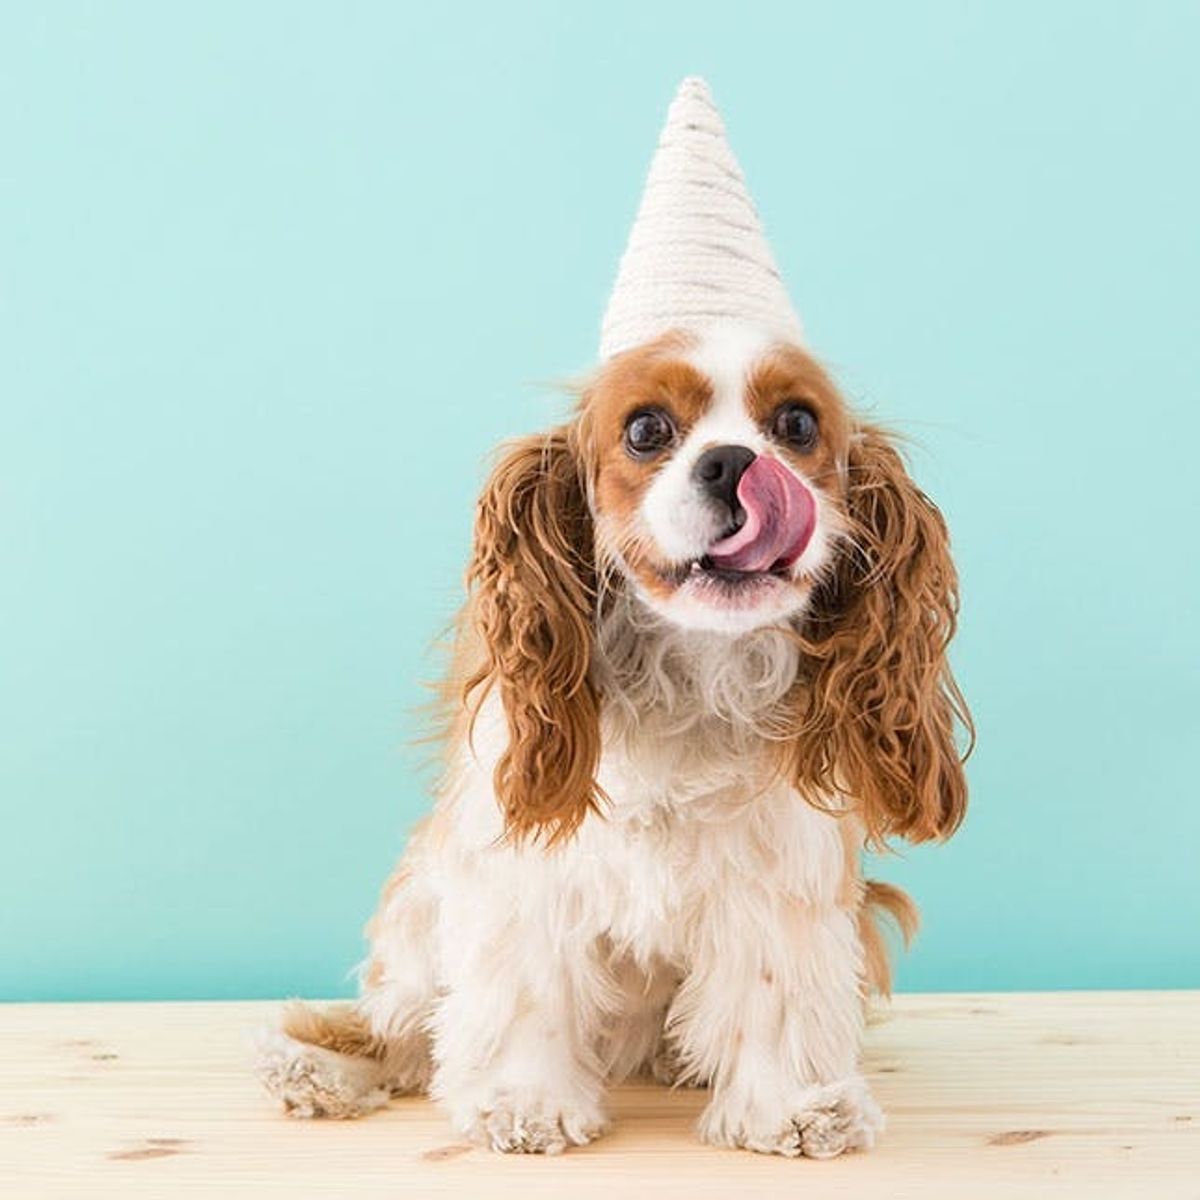 How to Make a Unicorn Costume for Your Dog This Halloween